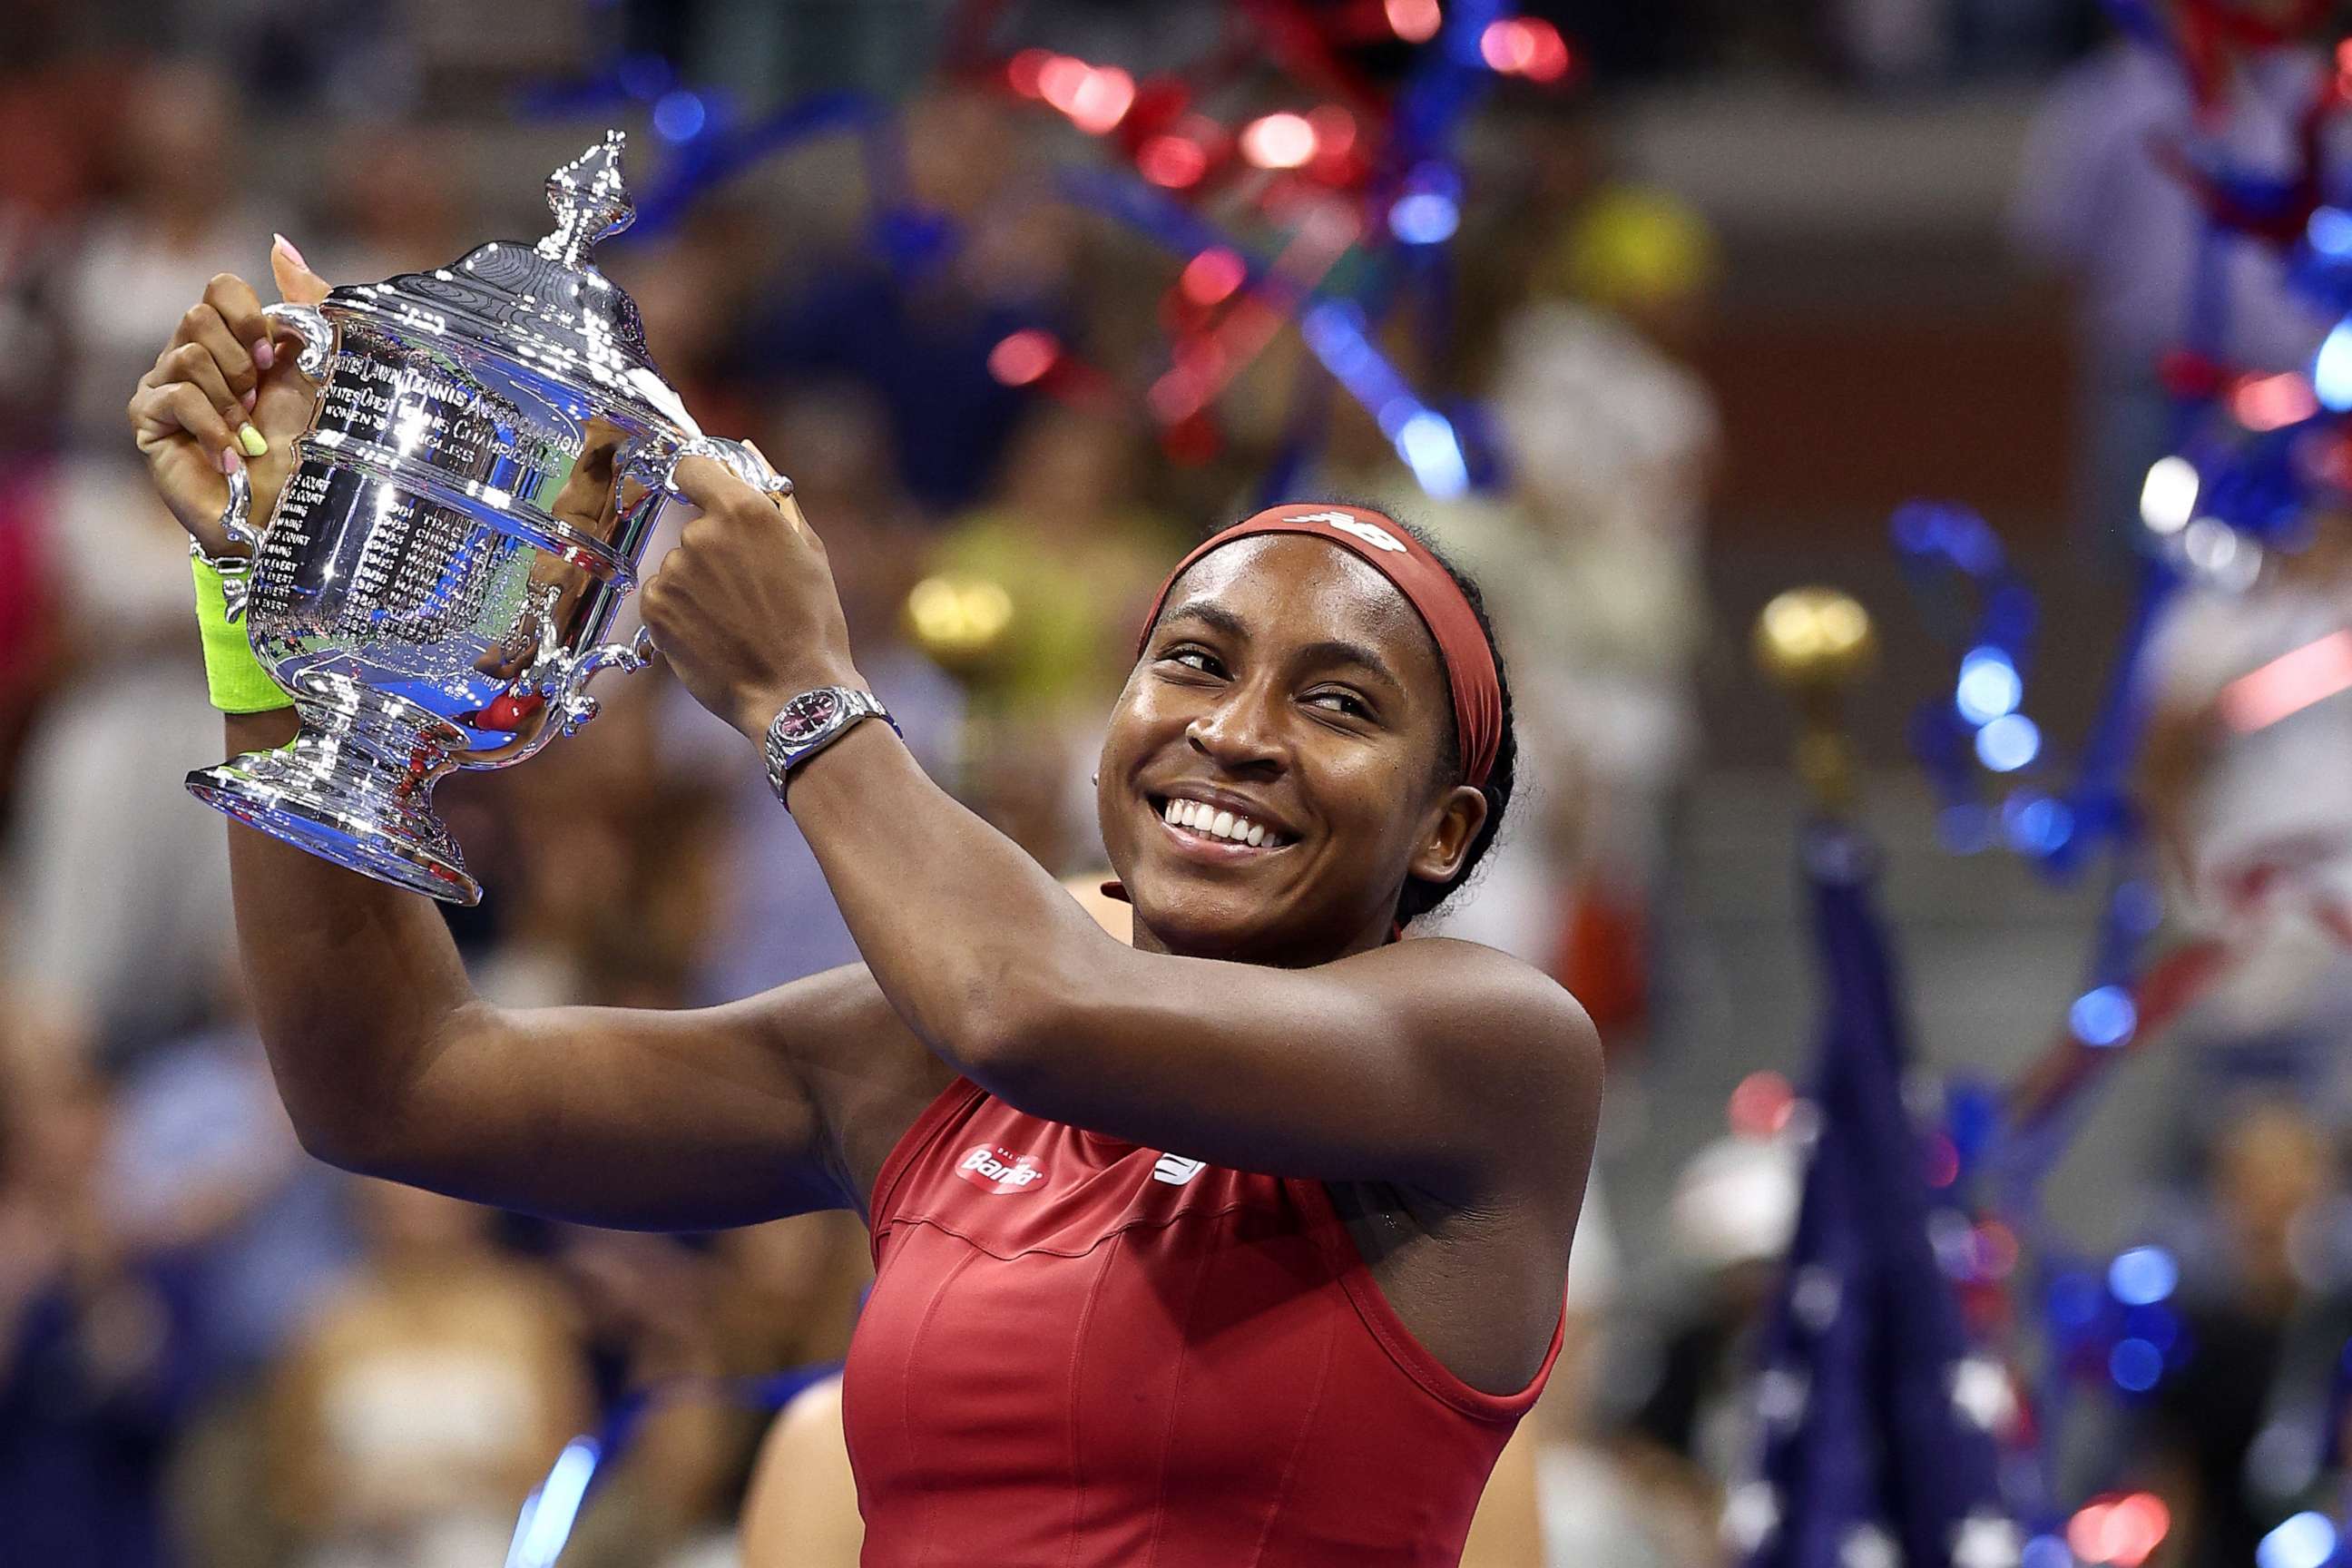 'Brought to tears' Coco Gauff describes the moments after her US Open